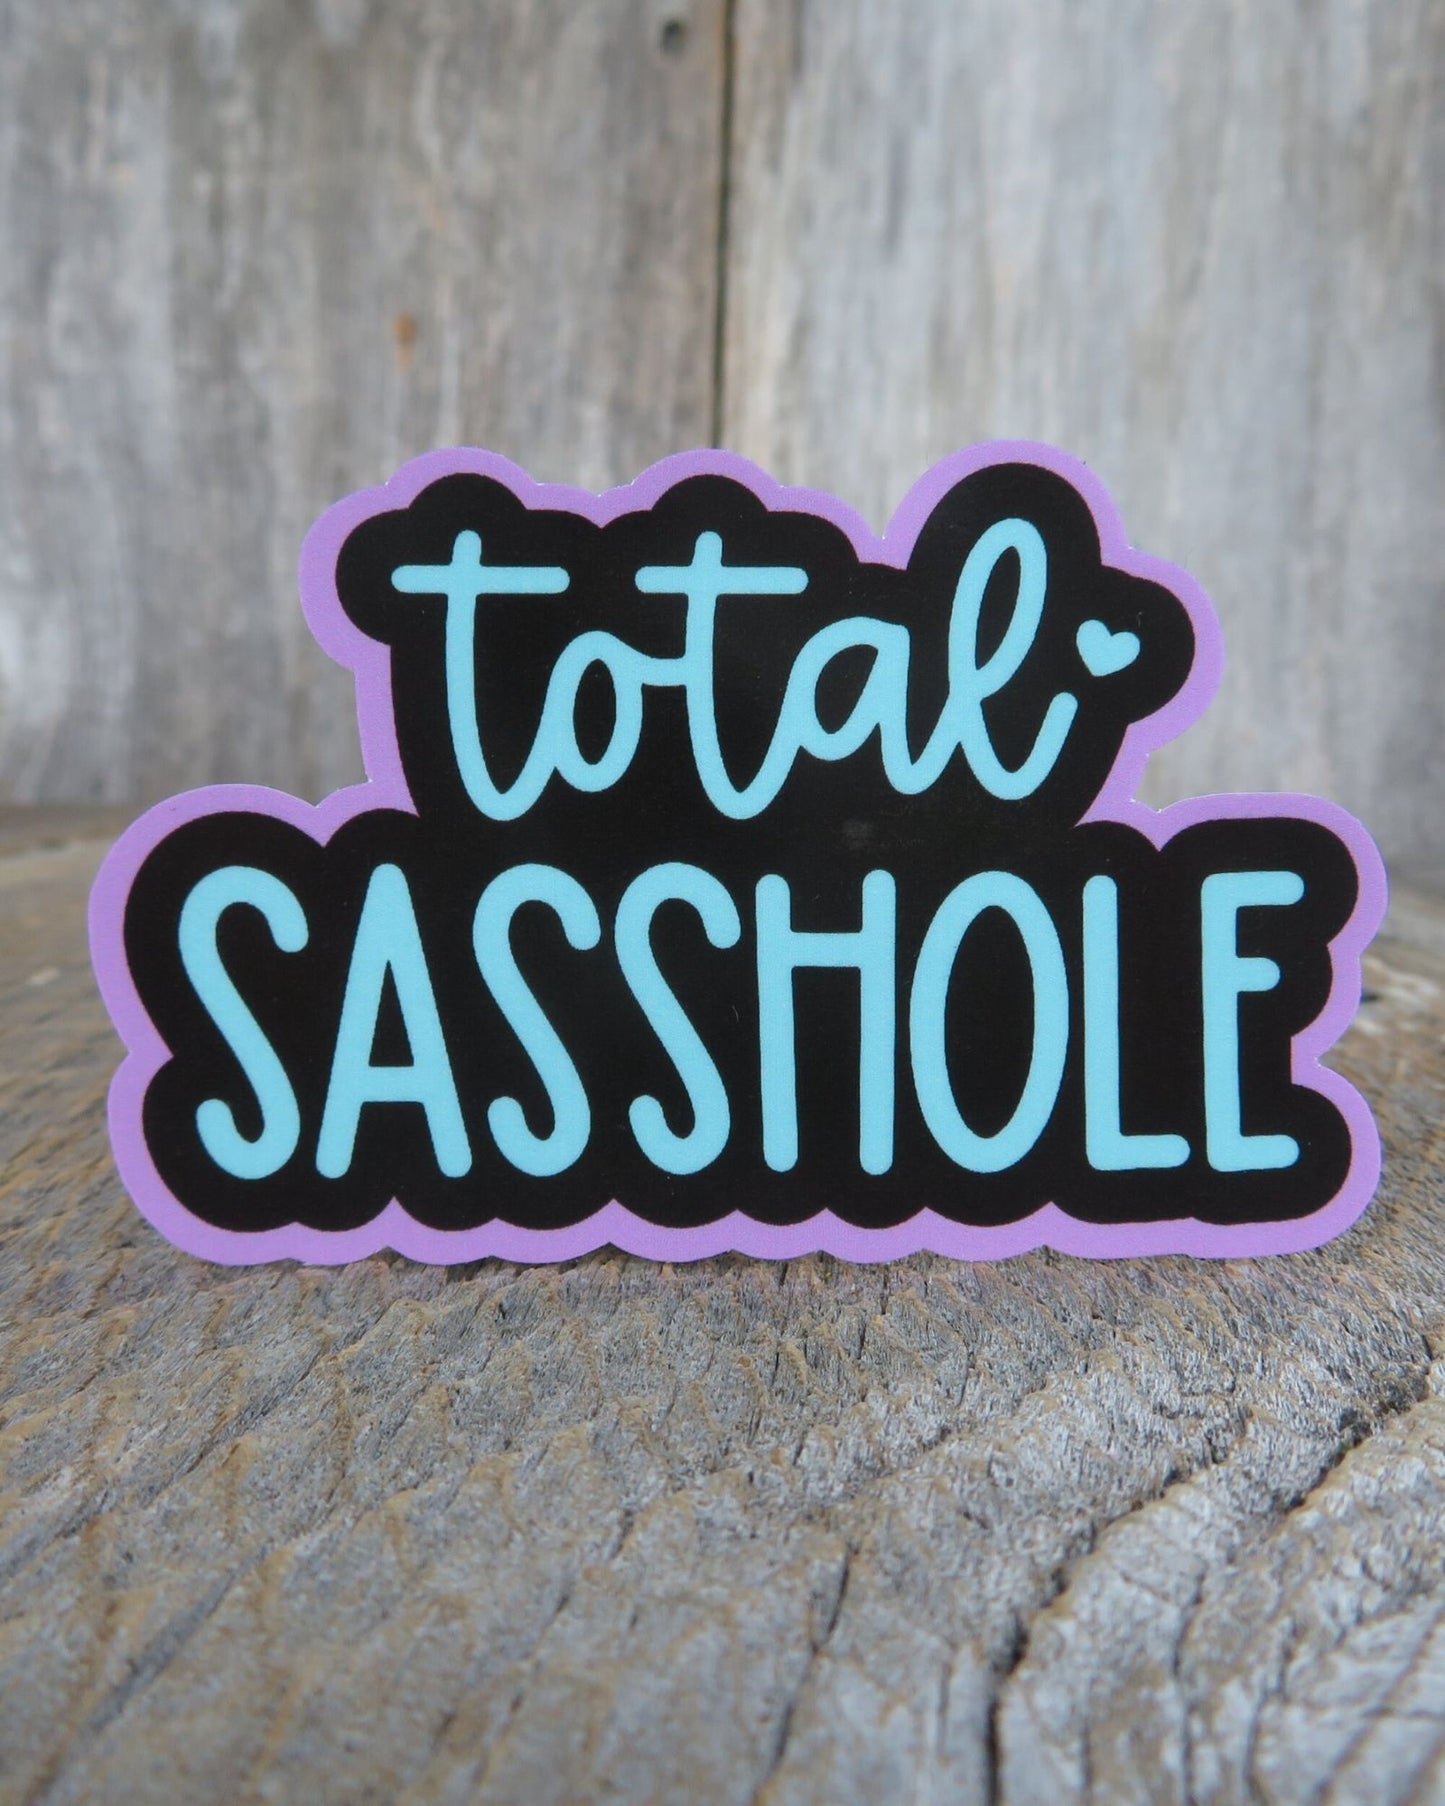 Total Sasshole Sticker Sassy People Full Color Social Outspoken Sarcastic Phrase Stickers